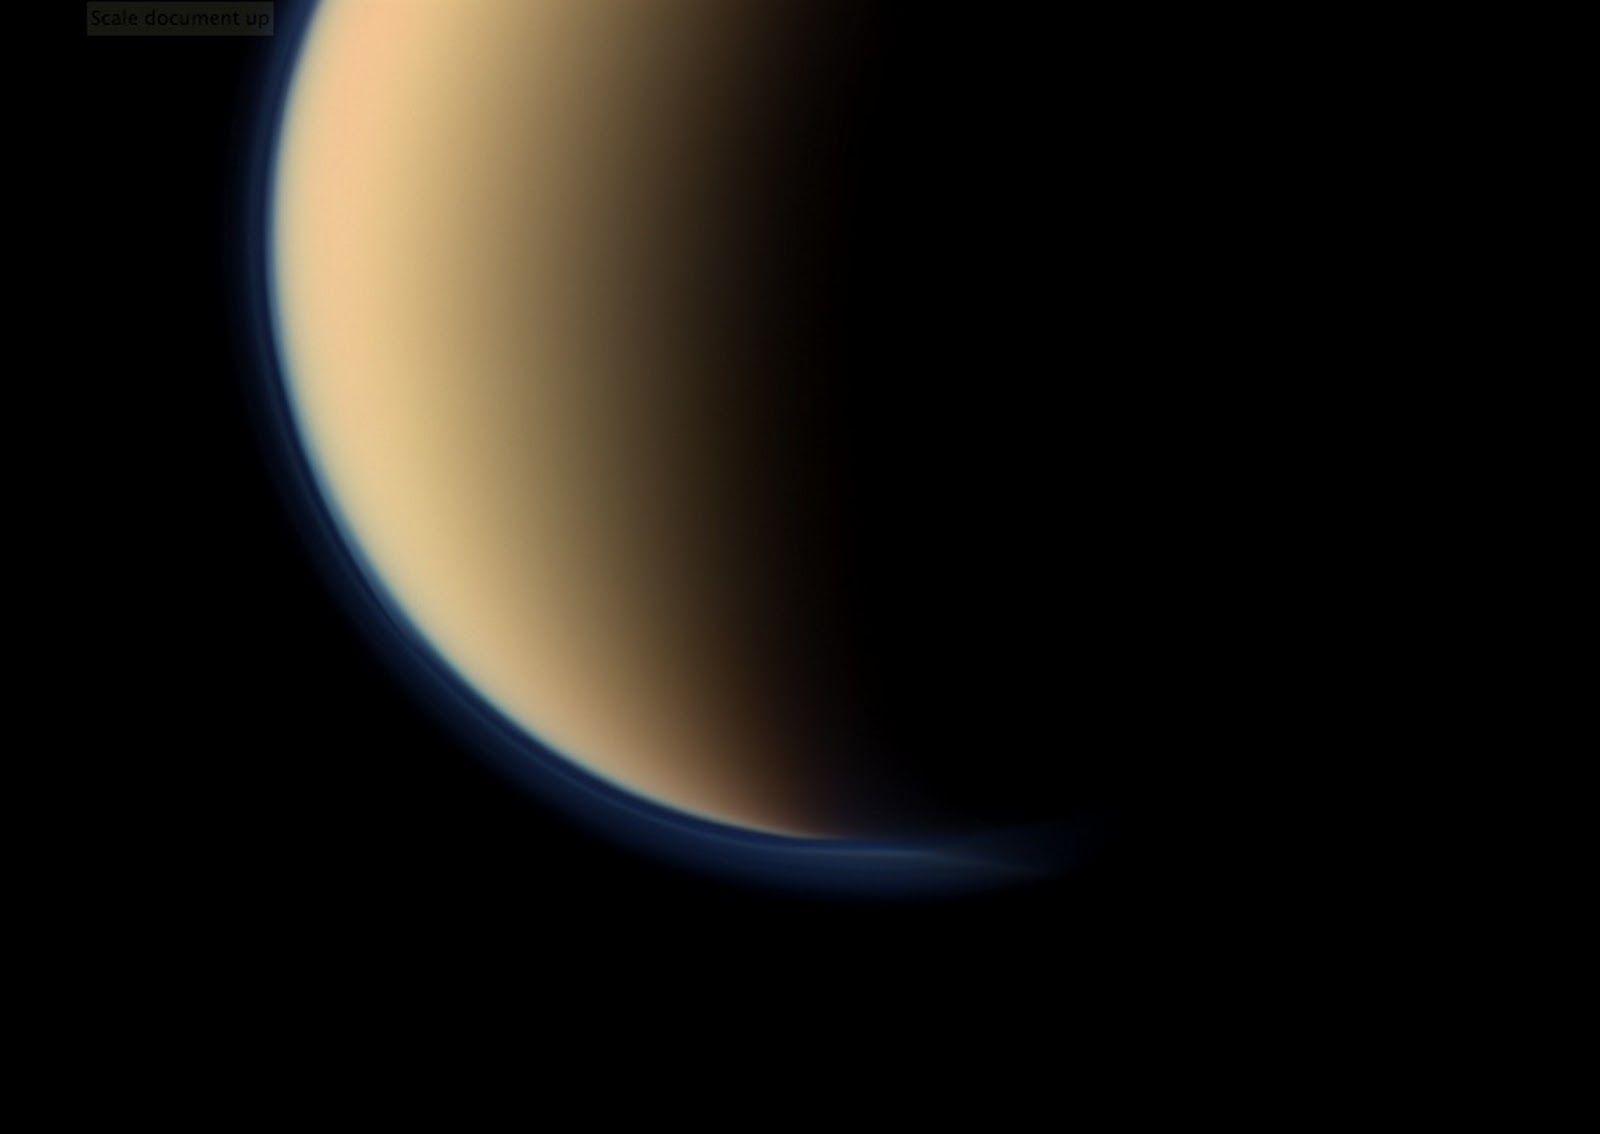 1001Best Wallpaper: Saturn's Moon Titan May Be More Earth Like Than Thought